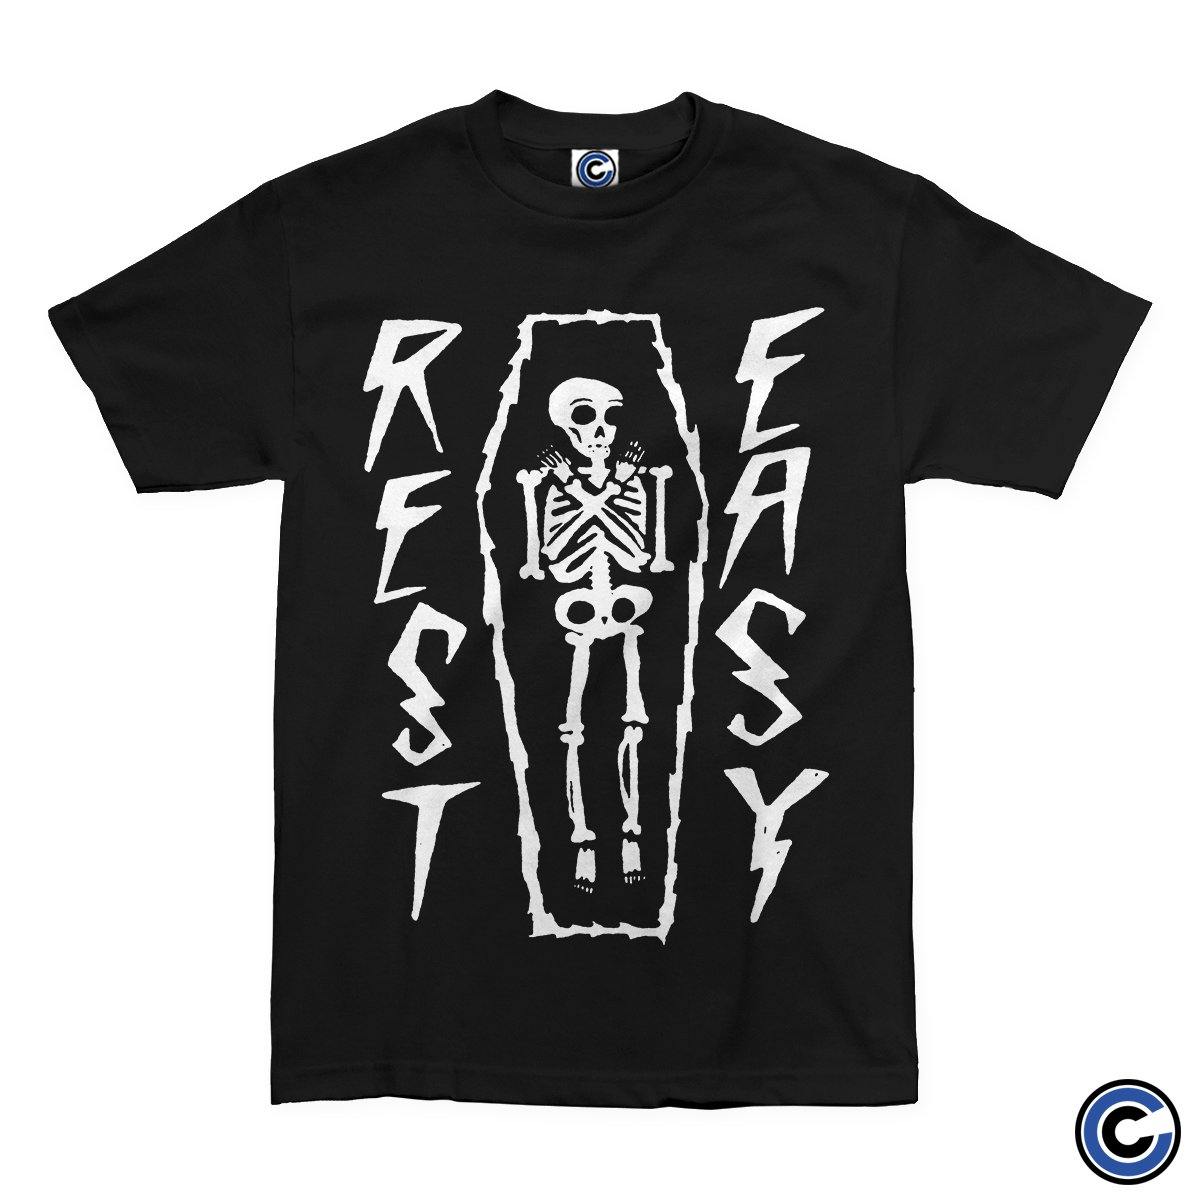 Buy – Rest Easy "Skeleton" Shirt – Band & Music Merch – Cold Cuts Merch